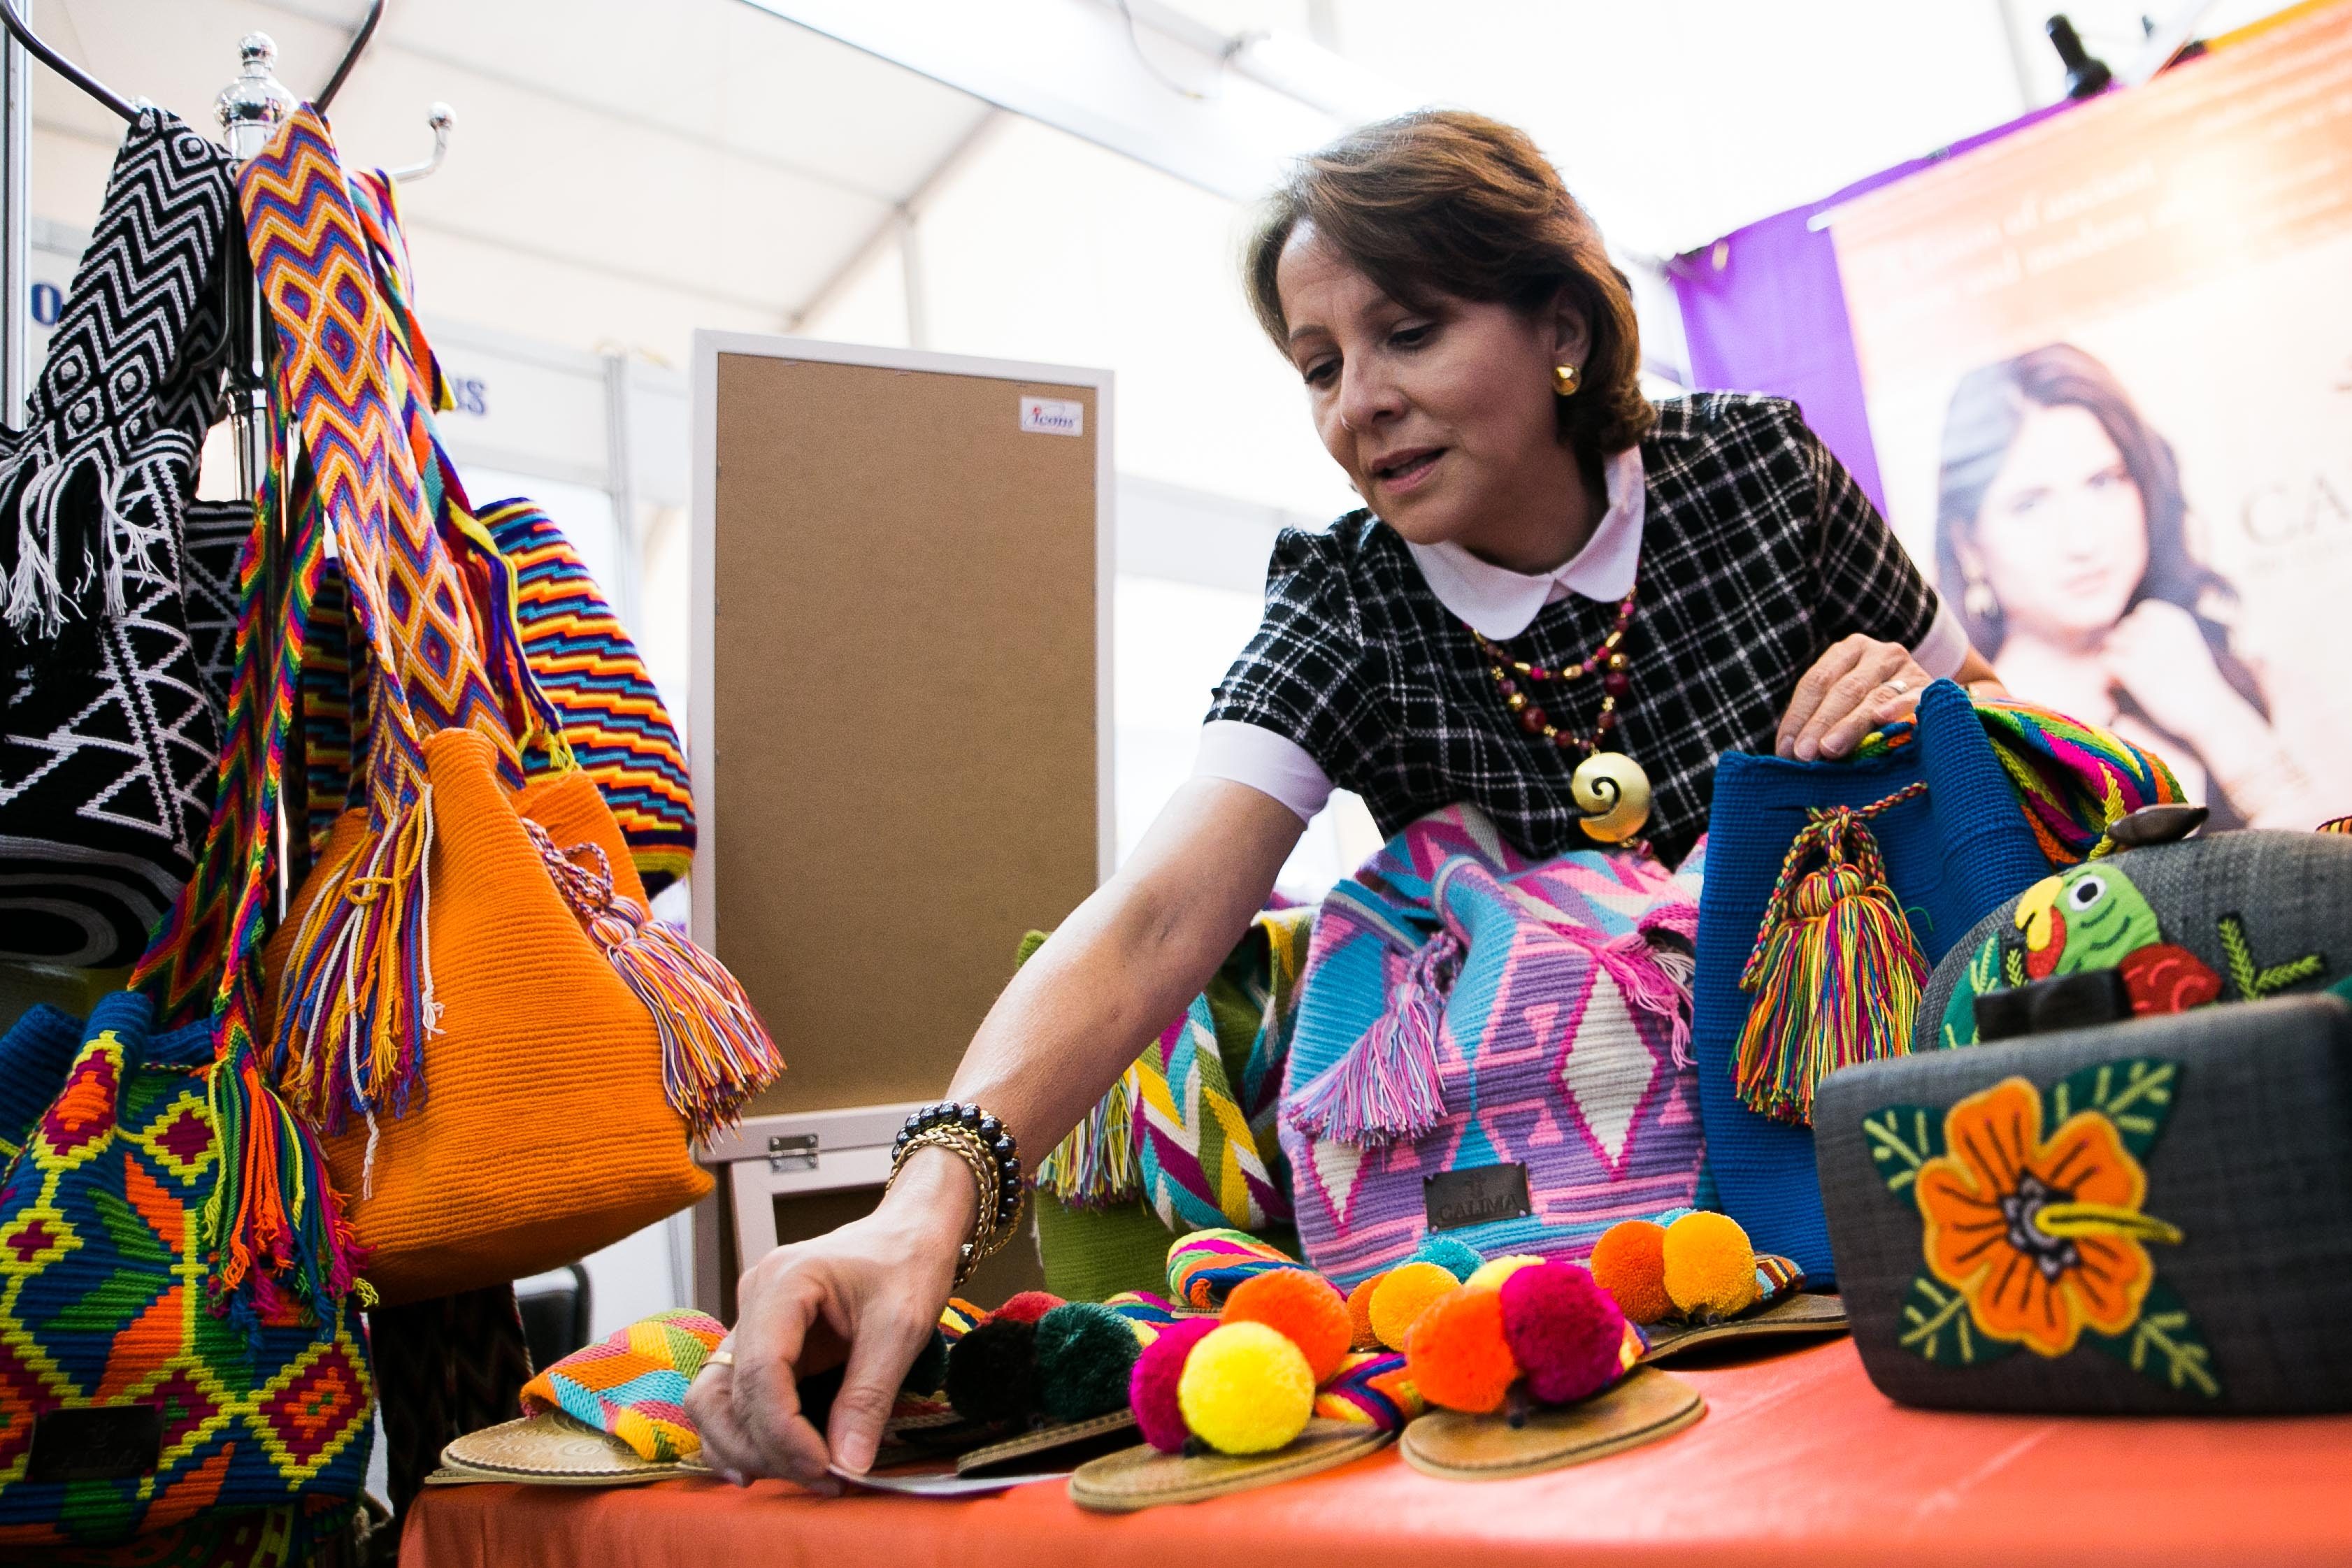 FROM CALIMA. Colombian Claudia Hernandez fixes her products at the APEC International Media Center. She sells sandals, bags, and purses made by the Wayuu tribe in Colombia, and jewelry inspired by Colombian designs. Photo by Pat Nabong/Rappler